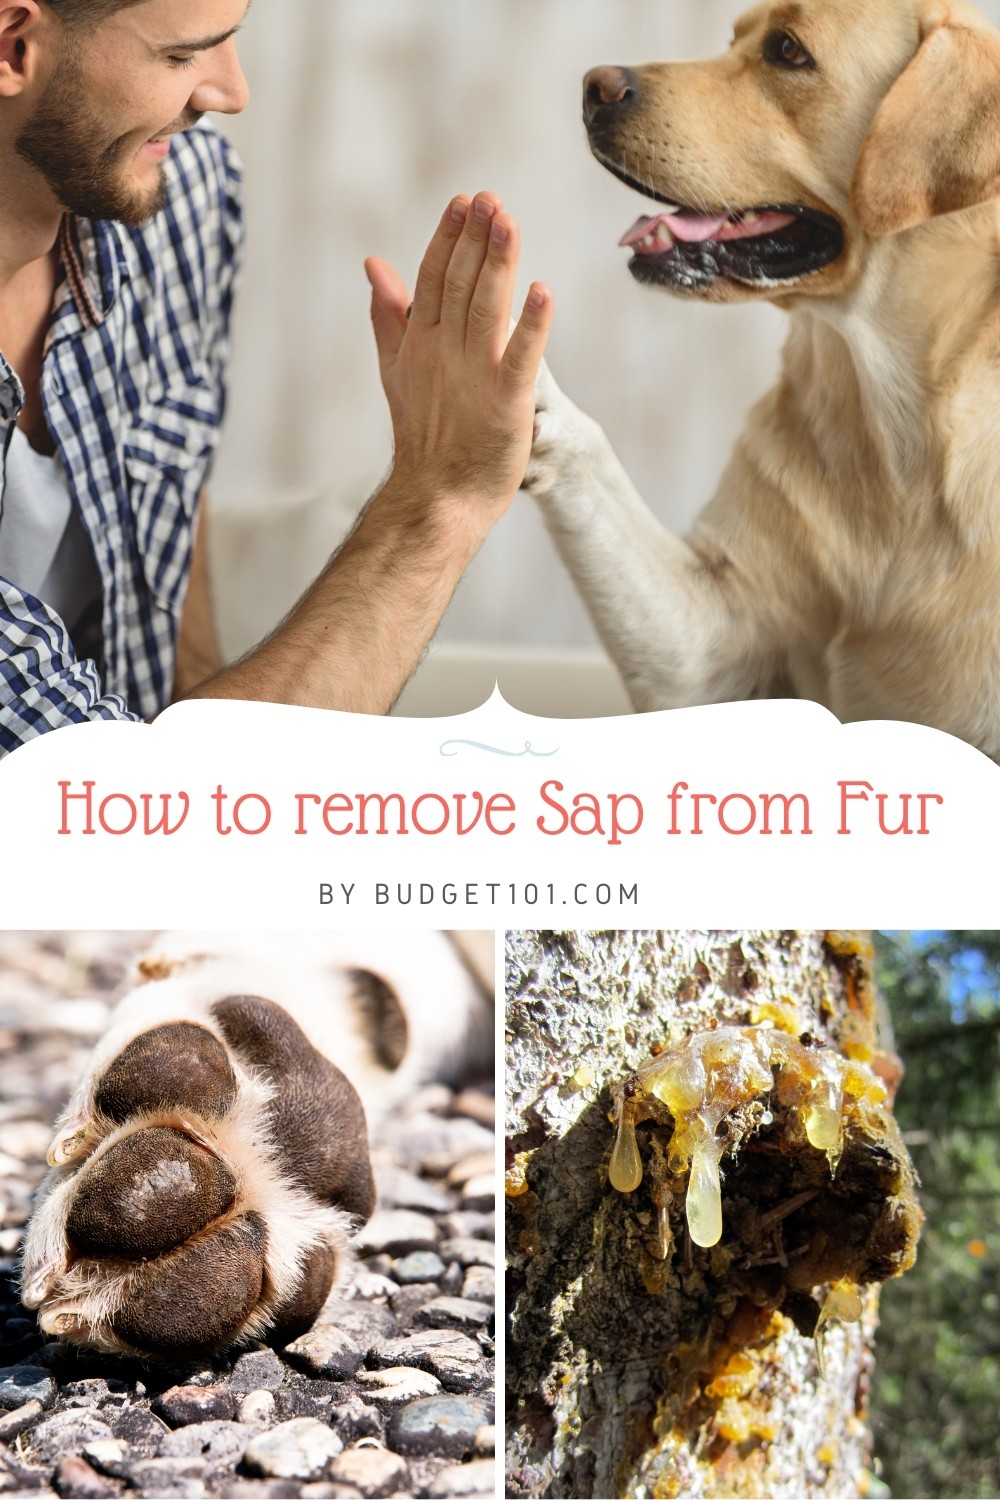 How to remove sap from pet's hair and nails easily # coat #removesap # Budget101 #tipsntricks